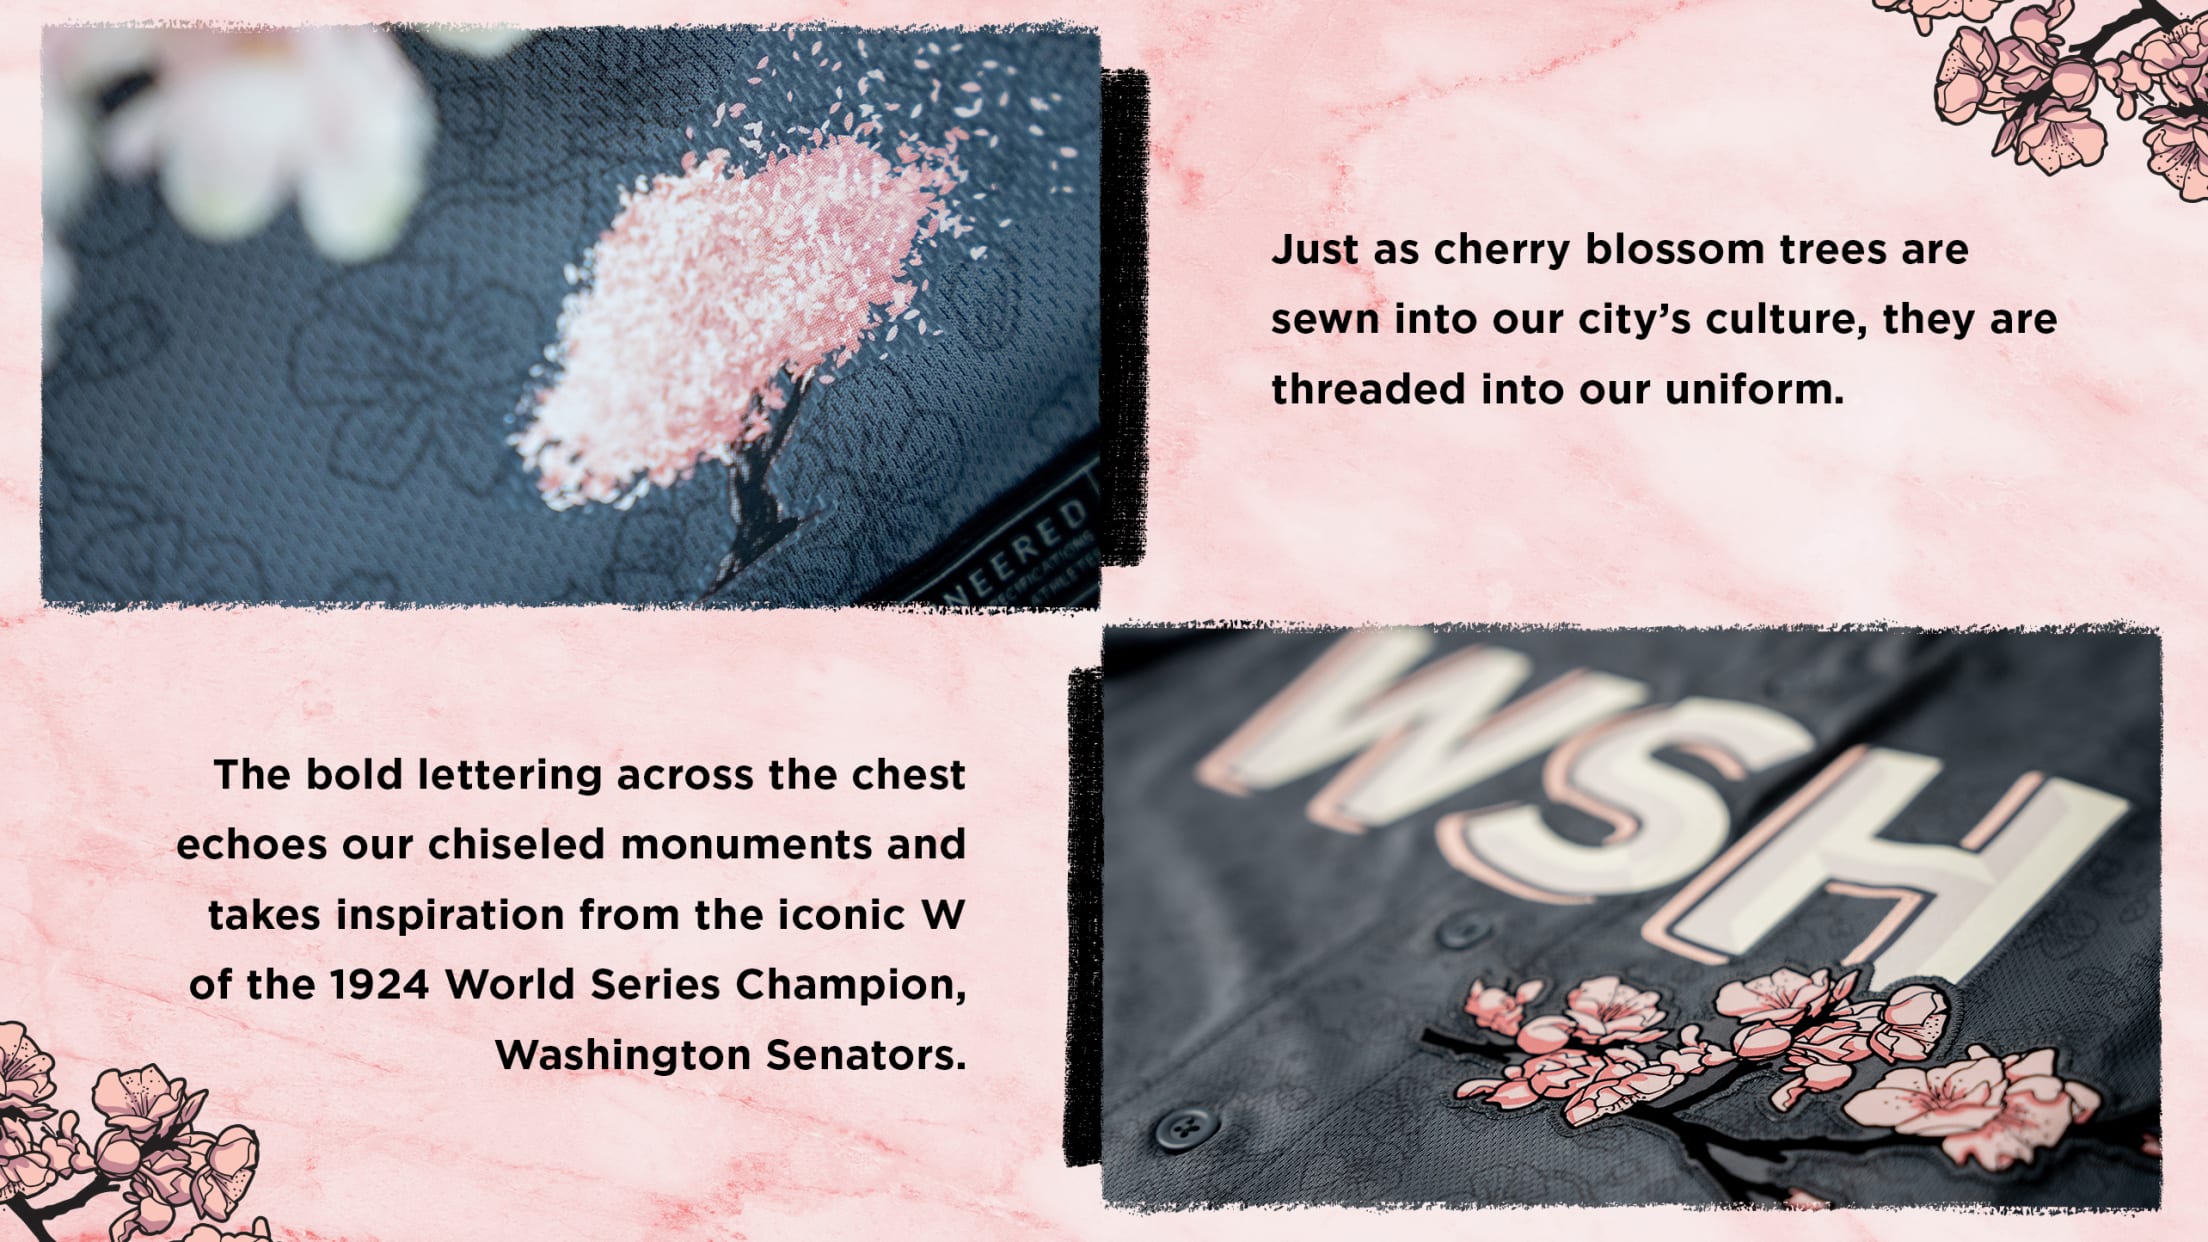 Washington Nationals Honor City's Iconic Cherry Blossoms with City Connect  Uniforms, by Nationals Communications